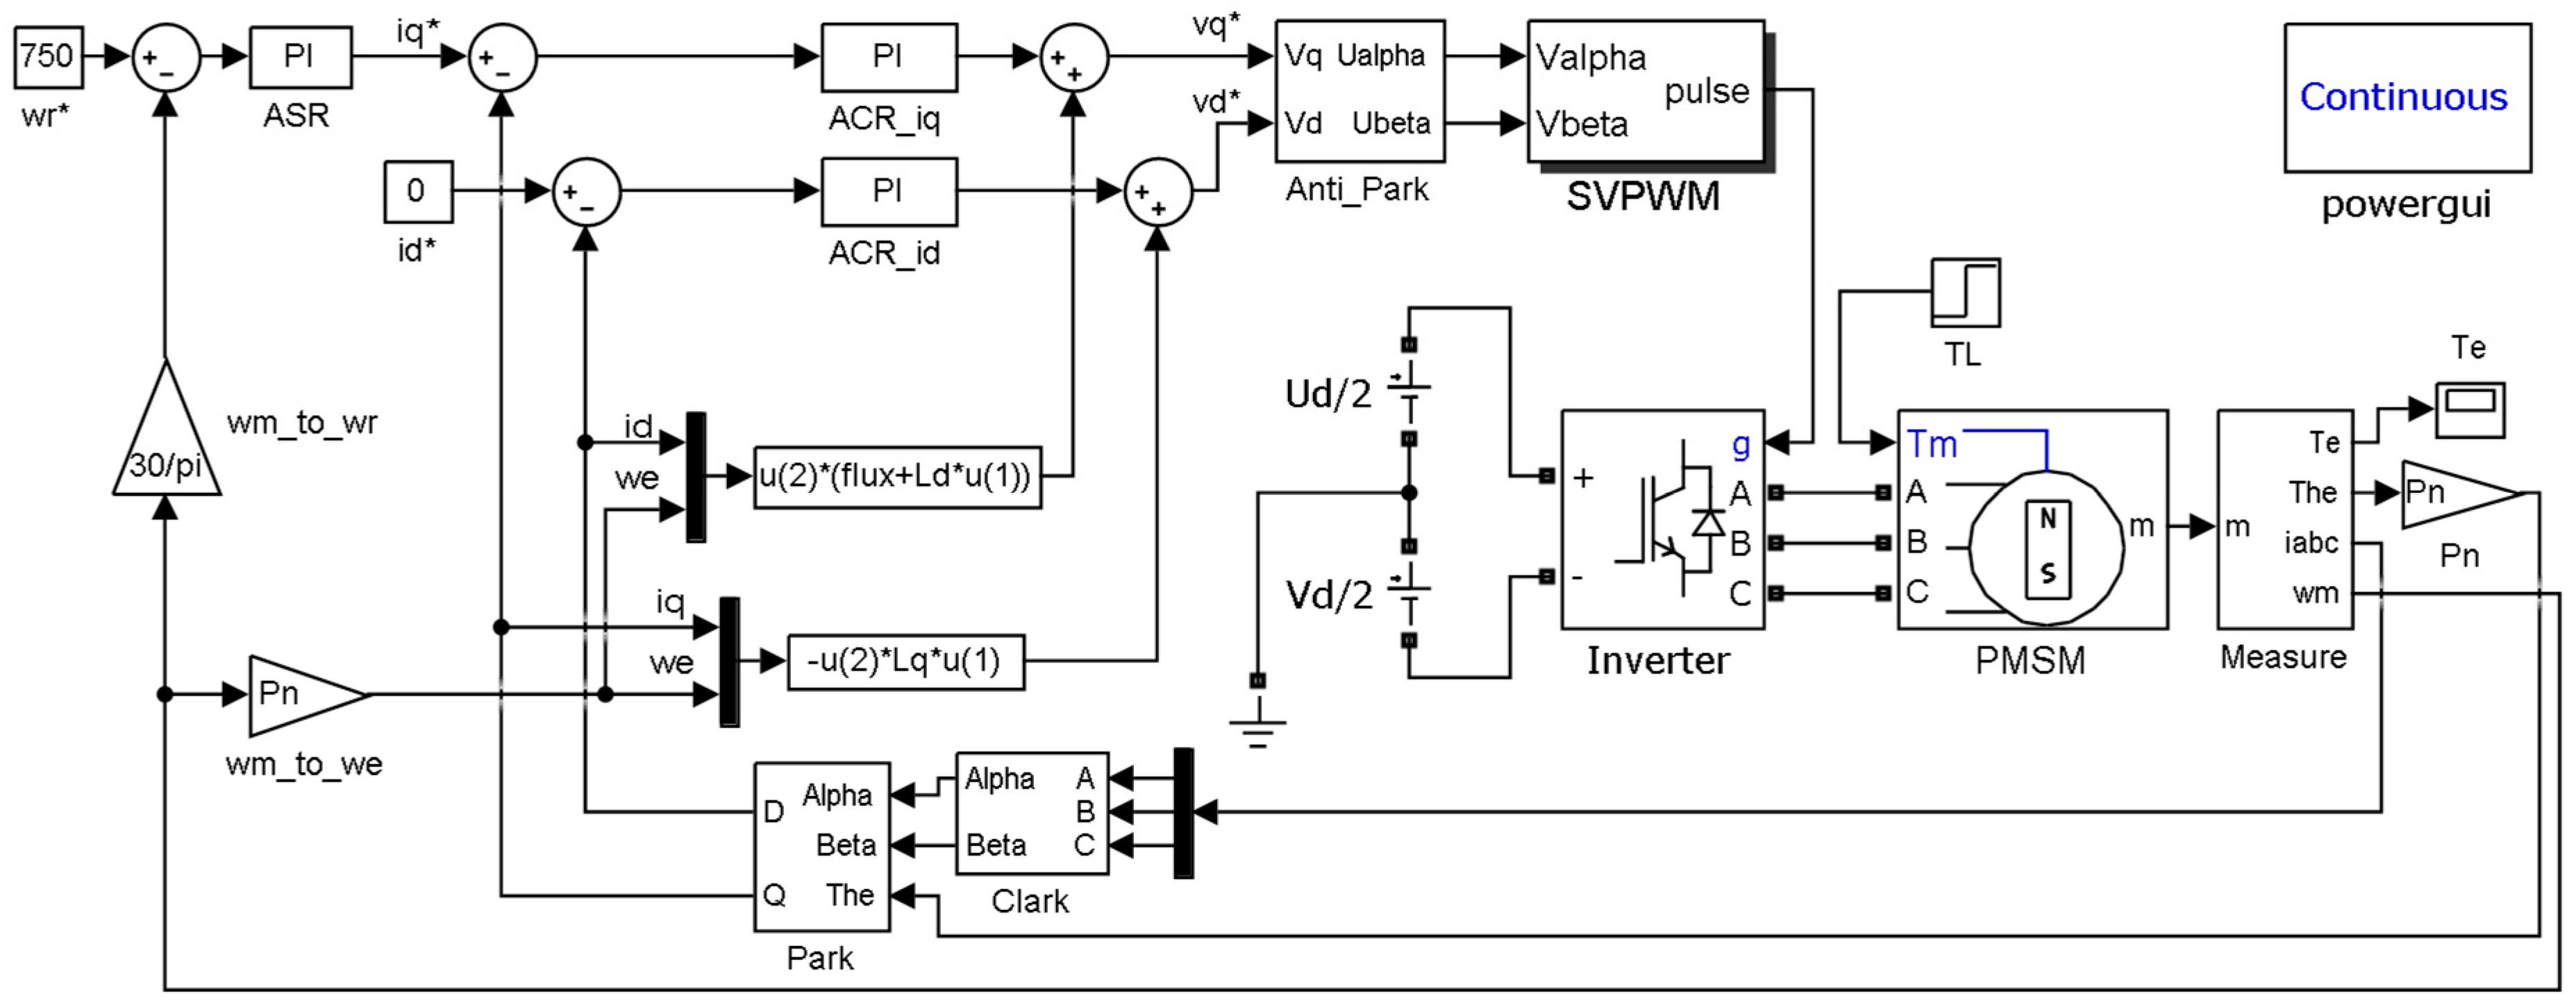 Energies | Free Full-Text | A Low Common-Mode SVPWM for Two-Level Three ...